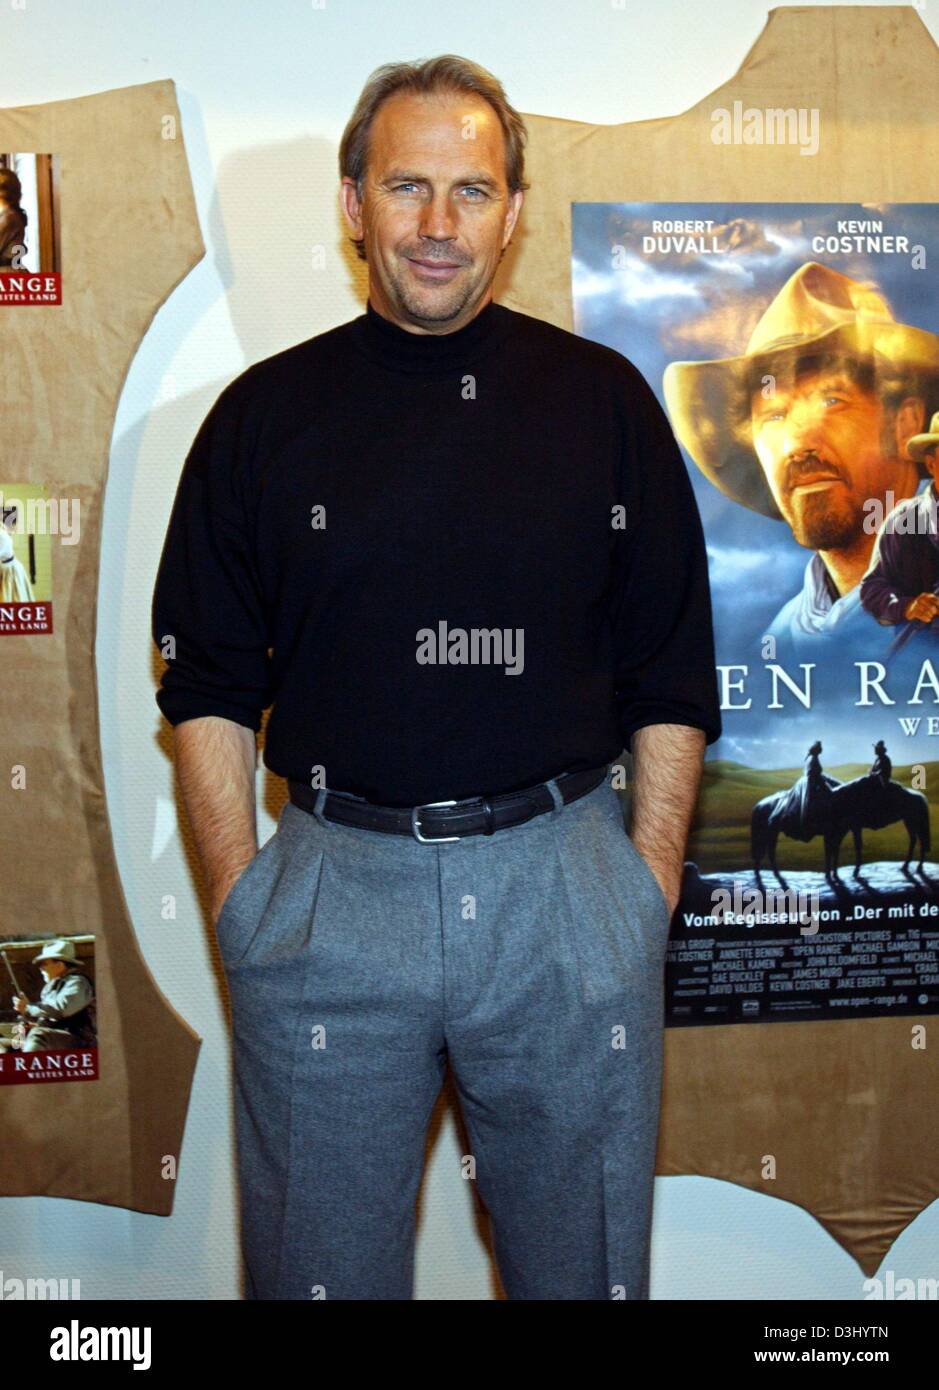 (dpa) - US actor and director Kevin Costner smiles as he poses in front of a poster which advertises his latest film 'Open Range' shortly before the premiere of Kostner's film in Hamburg, Germany, 23 January 2004. The film will be officially released in Germany on 29 January 2004. Stock Photo